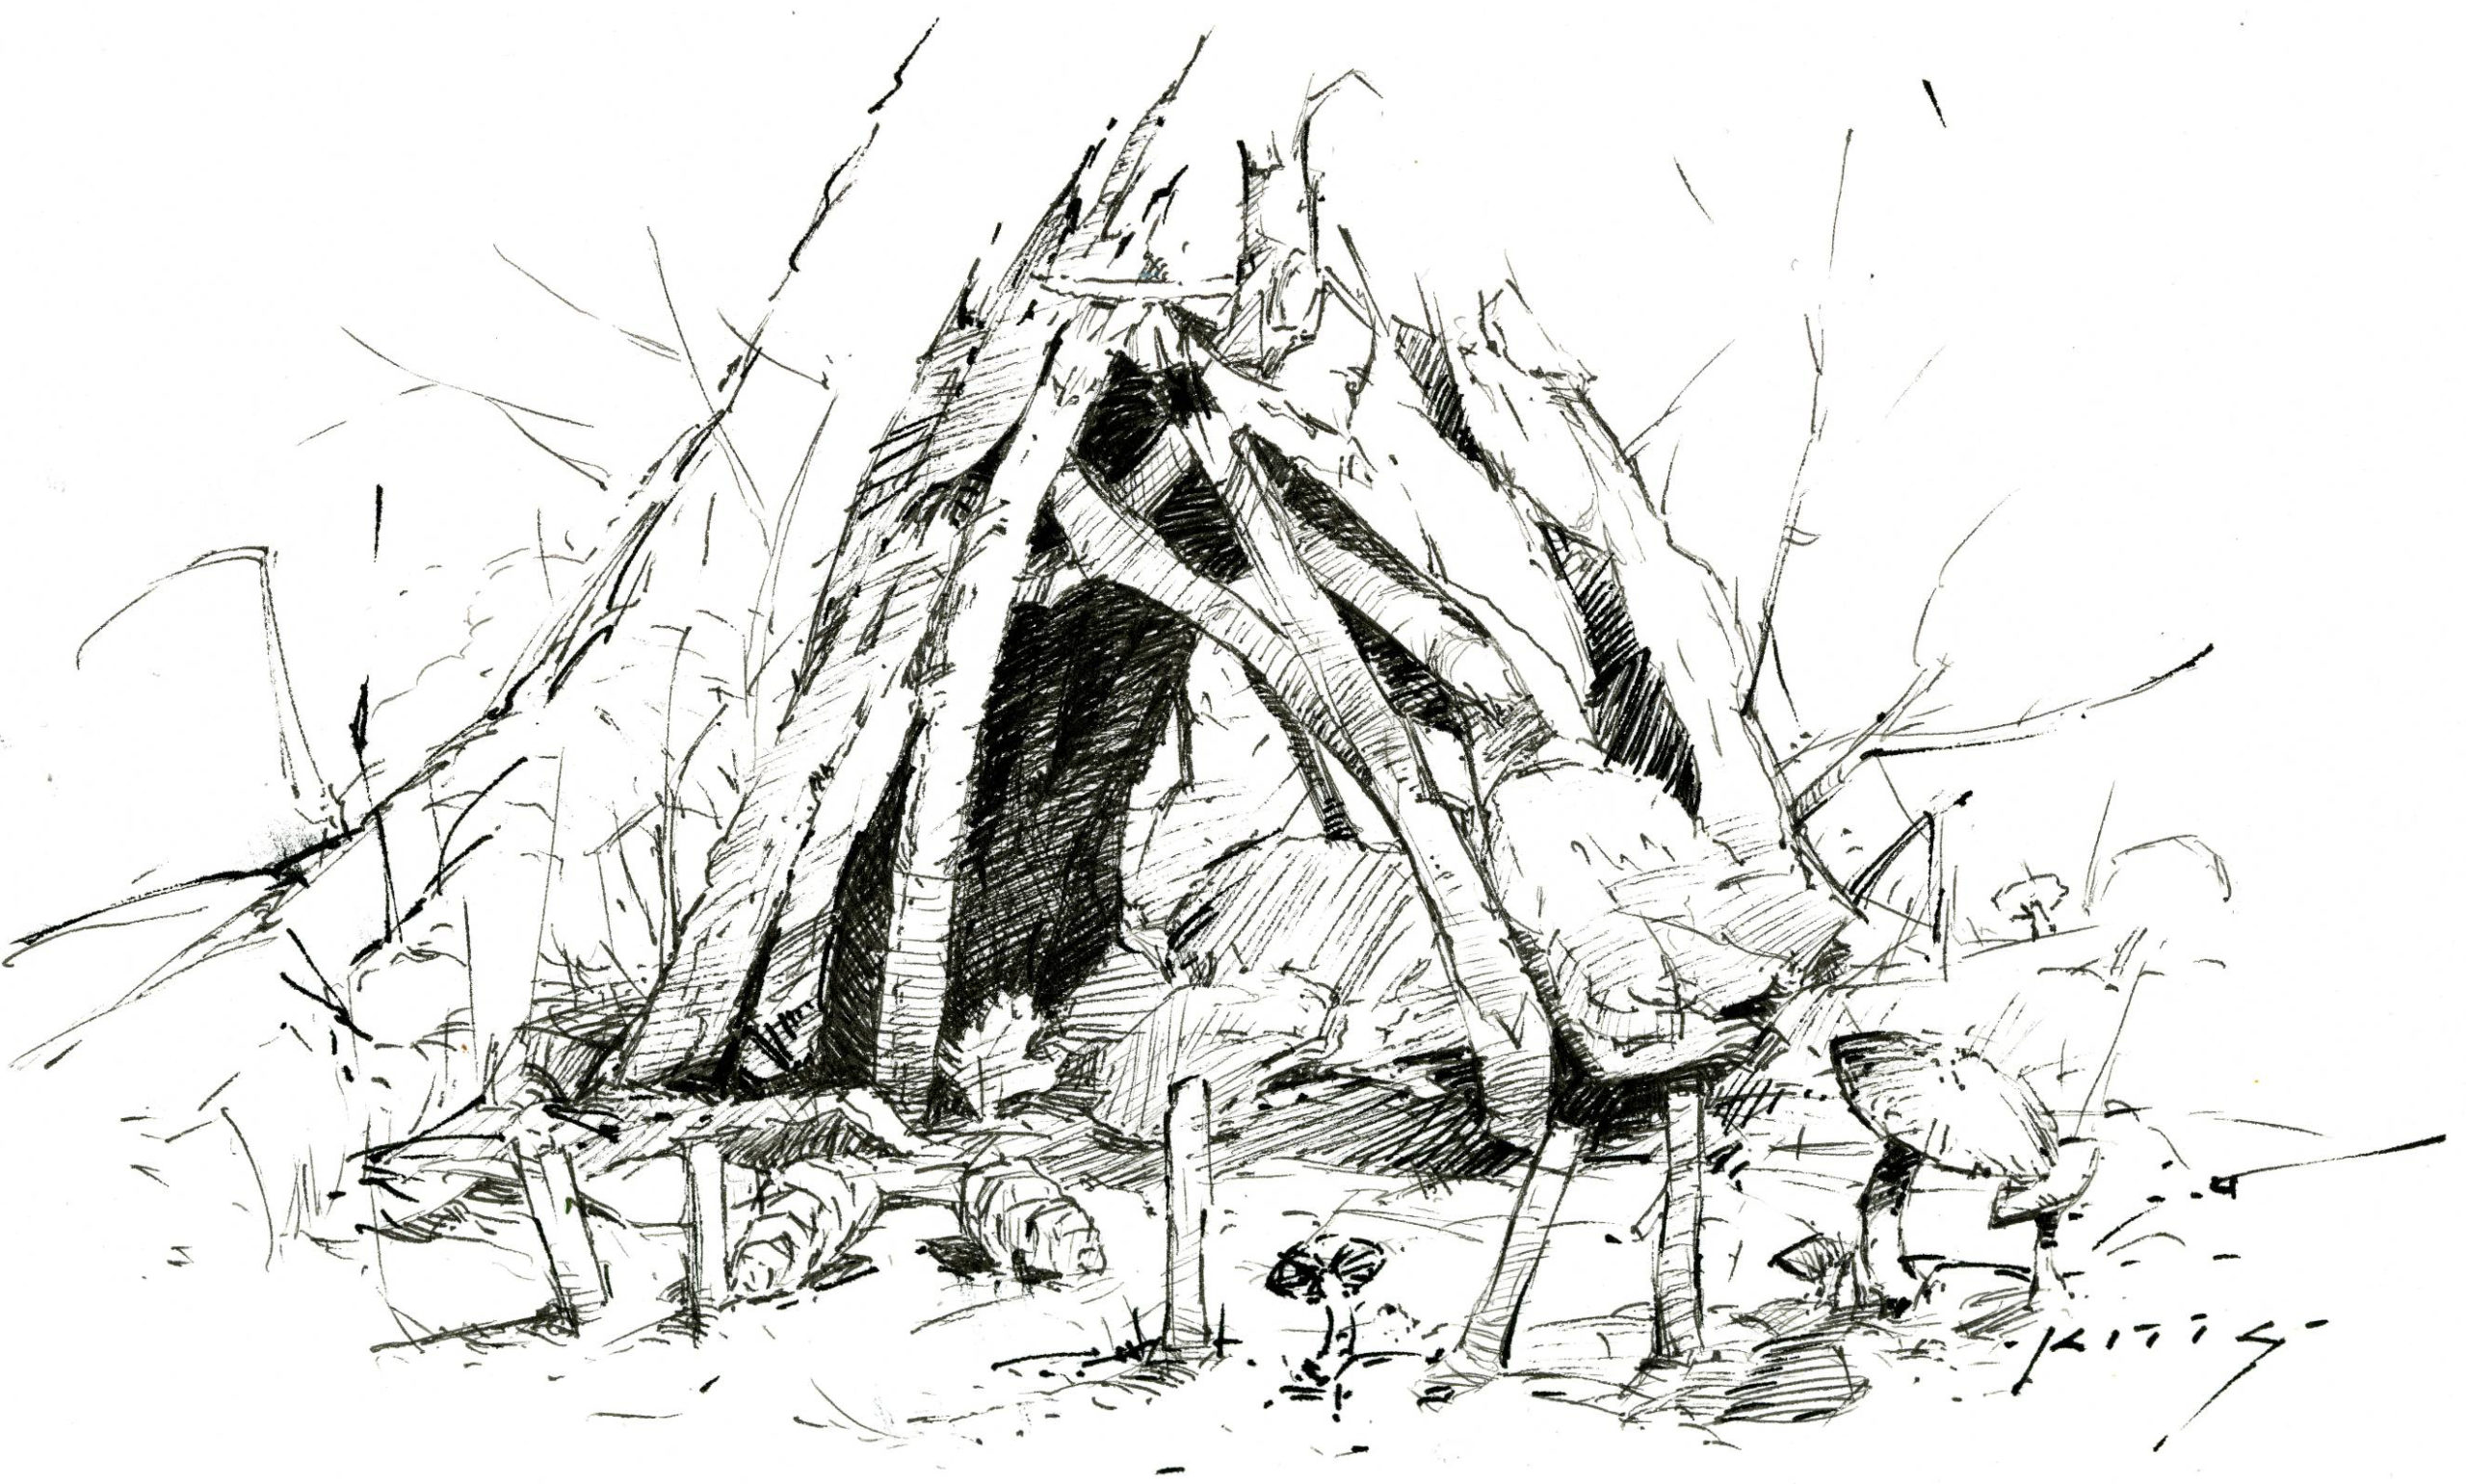 Thomas Jefferson Kitts, "Fairy House in Cathedral Woods," ink vignette